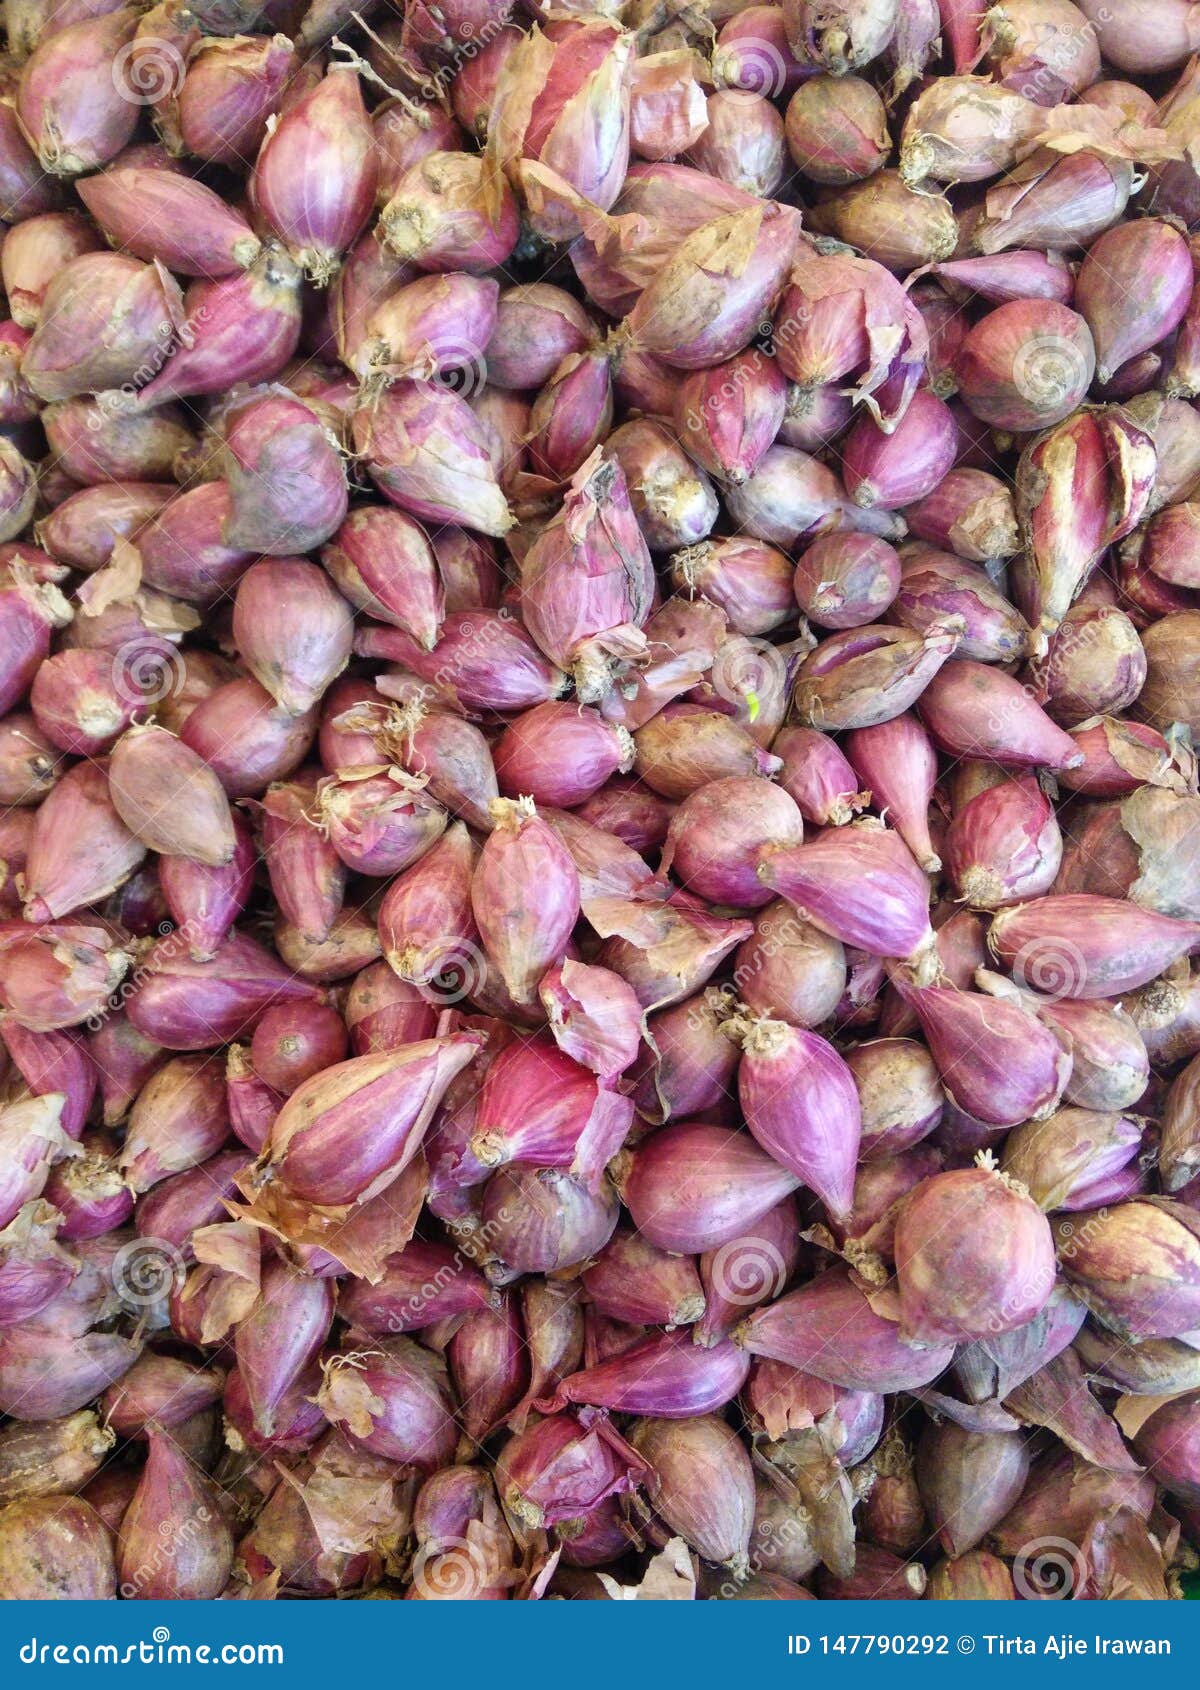 bawang merah or red onion on a market